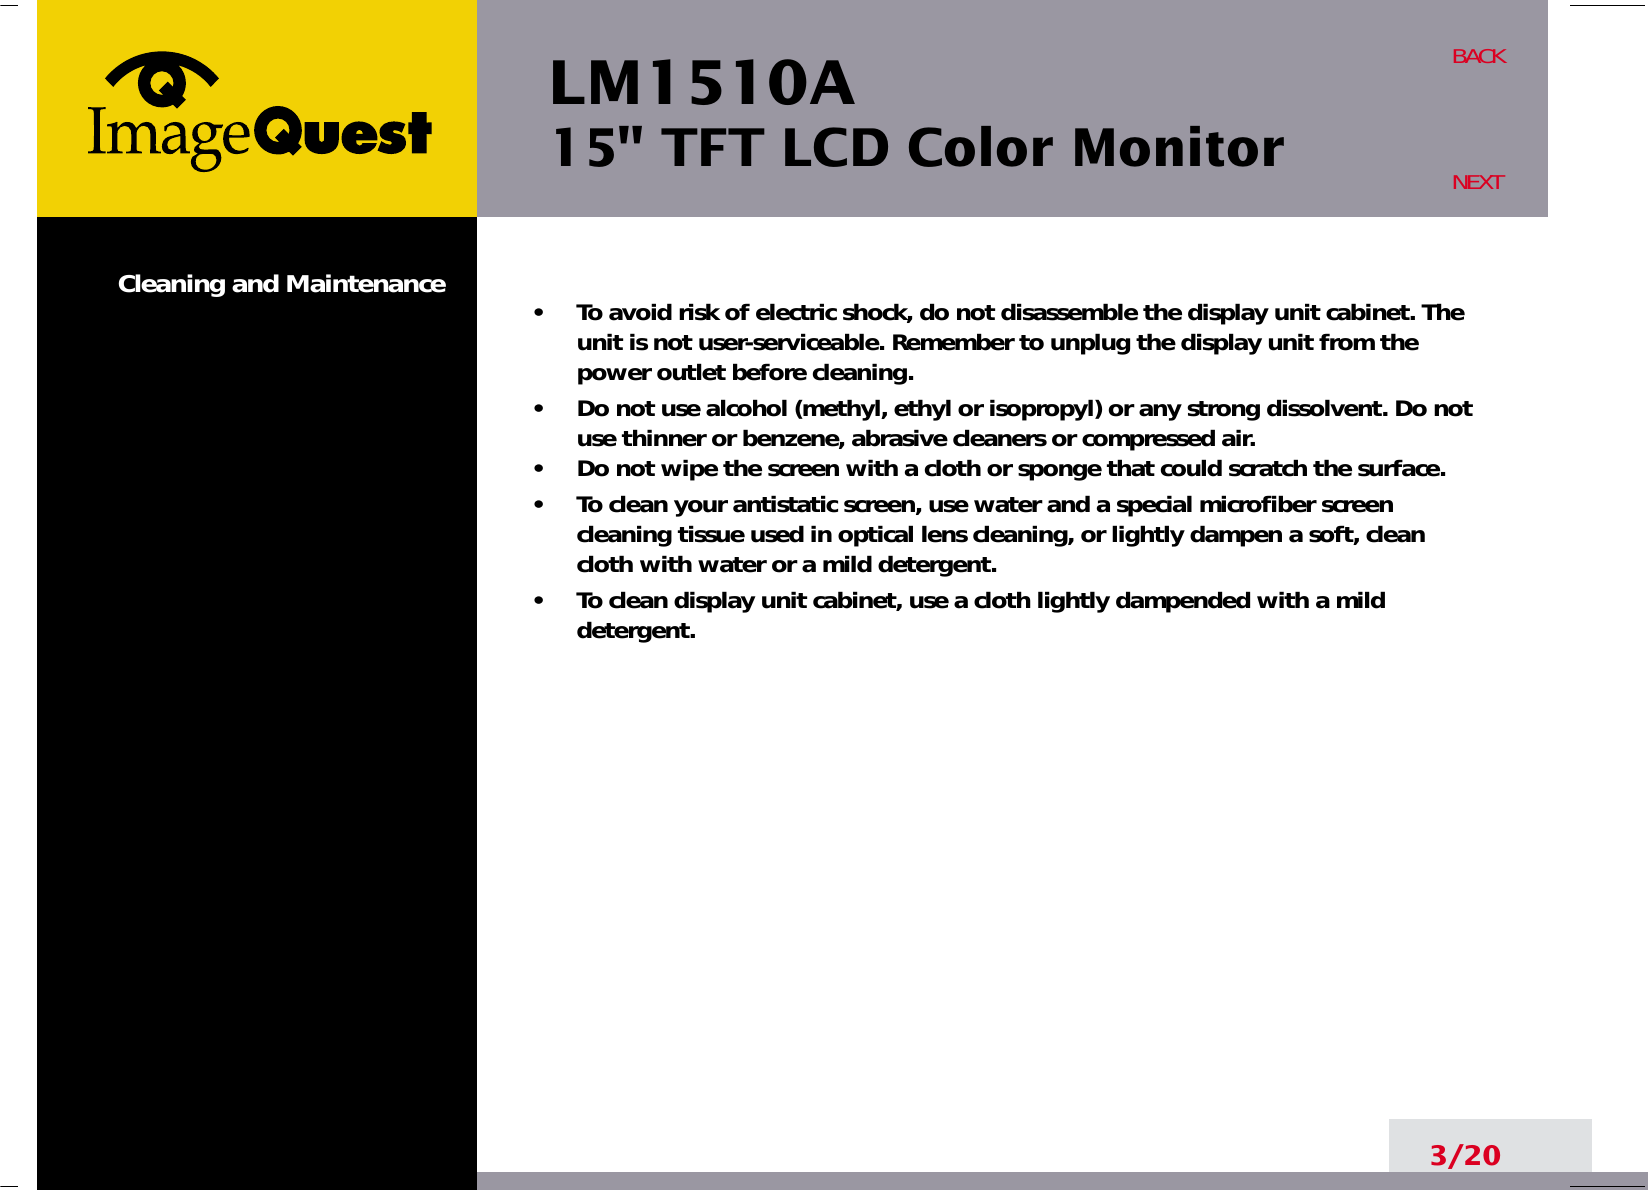 LM1510A15&quot; TFT LCD Color MonitorCleaning and Maintenance •     To avoid risk of electric shock, do not disassemble the display unit cabinet. Theunit is not user-serviceable. Remember to unplug the display unit from thepower outlet before cleaning.•     Do not use alcohol (methyl, ethyl or isopropyl) or any strong dissolvent. Do notuse thinner or benzene, abrasive cleaners or compressed air.•     Do not wipe the screen with a cloth or sponge that could scratch the surface.•     To clean your antistatic screen, use water and a special microfiber screencleaning tissue used in optical lens cleaning, or lightly dampen a soft, cleancloth with water or a mild detergent.•     To clean display unit cabinet, use a cloth lightly dampended with a milddetergent.3/20BACKNEXT